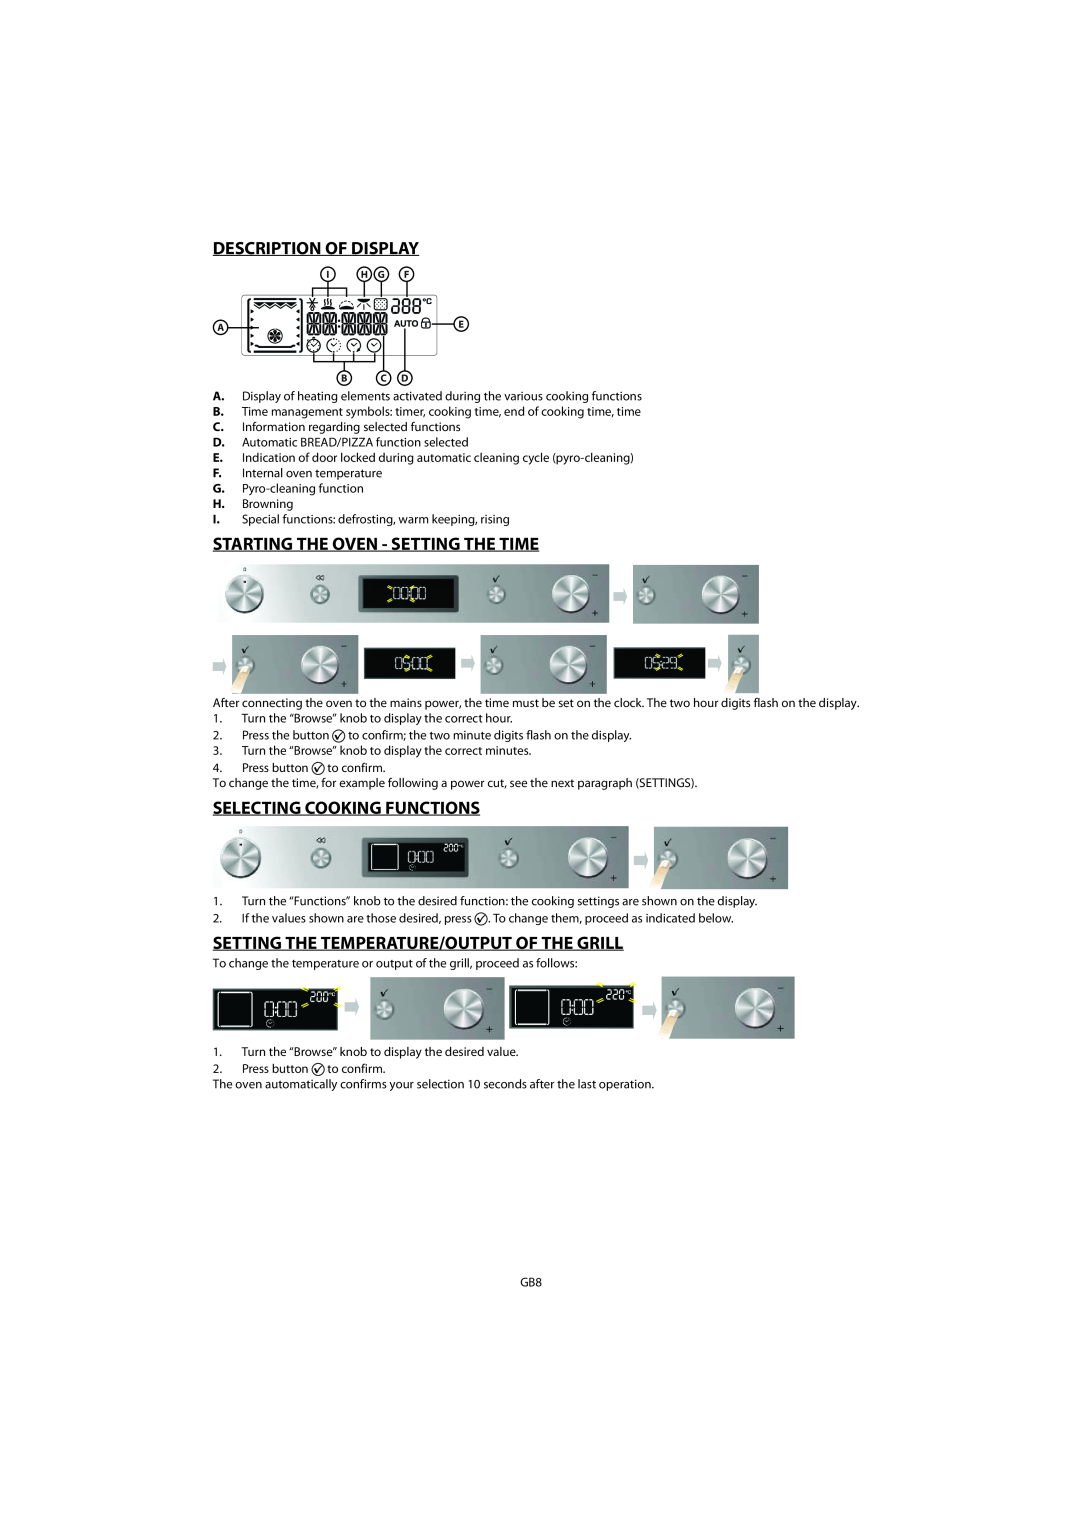 Whirlpool AKZM 755 Description Of Display, Starting The Oven - Setting The Time, Selecting Cooking Functions 